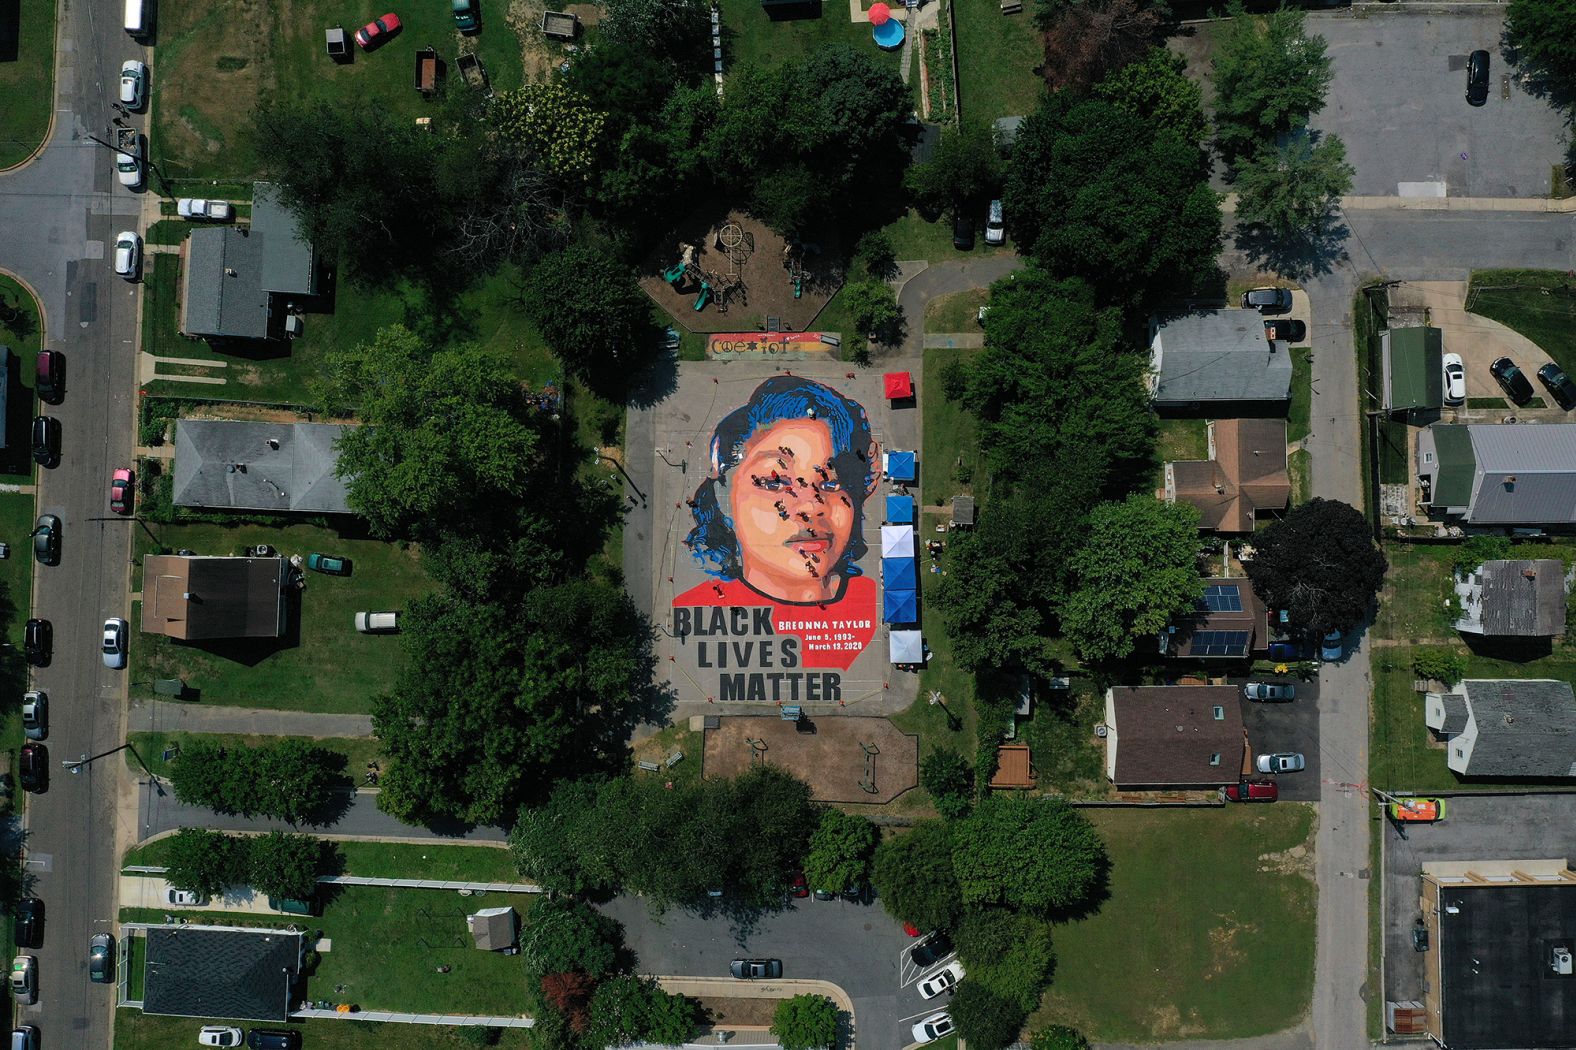 Artists and volunteers descended on a basketball court in a historically Black neighborhood of Annapolis, Maryland, <a href="https://www.cnn.com/2020/07/06/us/breonna-taylor-mural-trnd/index.html" target="_blank">to paint a 7,000-square-foot mural of Breonna Taylor</a> over the Fourth of July weekend. The project was led by Annapolis-based Future History Now, a nonprofit art collective that creates murals with youth facing adversity in underserved communities.